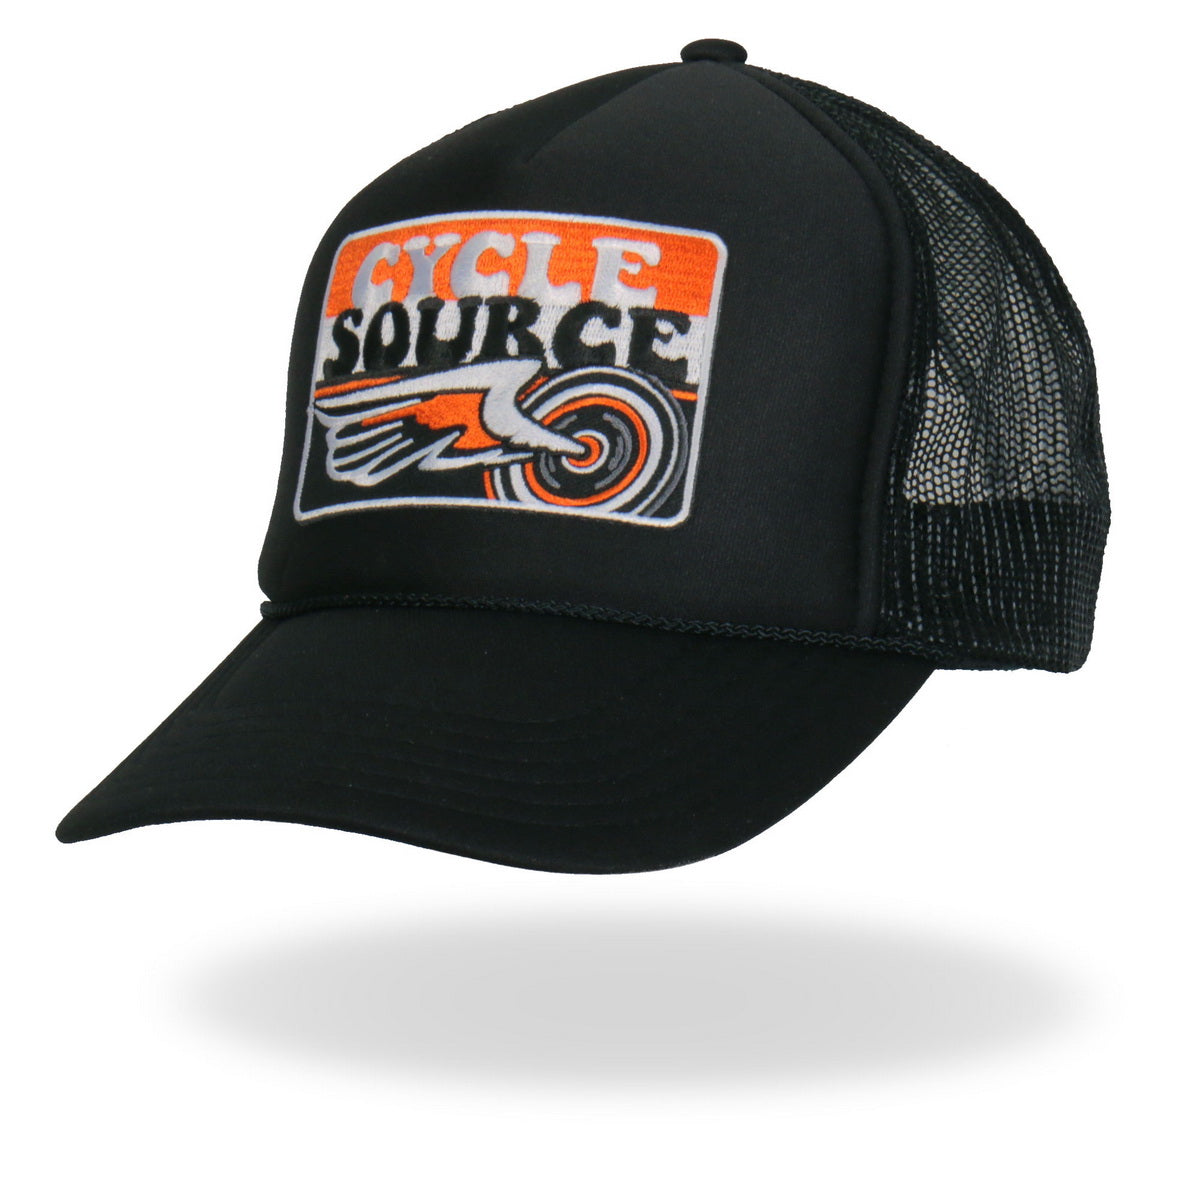 Hot Leathers CYA1003 Official Cycle Source Stripes Retro Wing Wheel Logo Snapback Trucker Hat